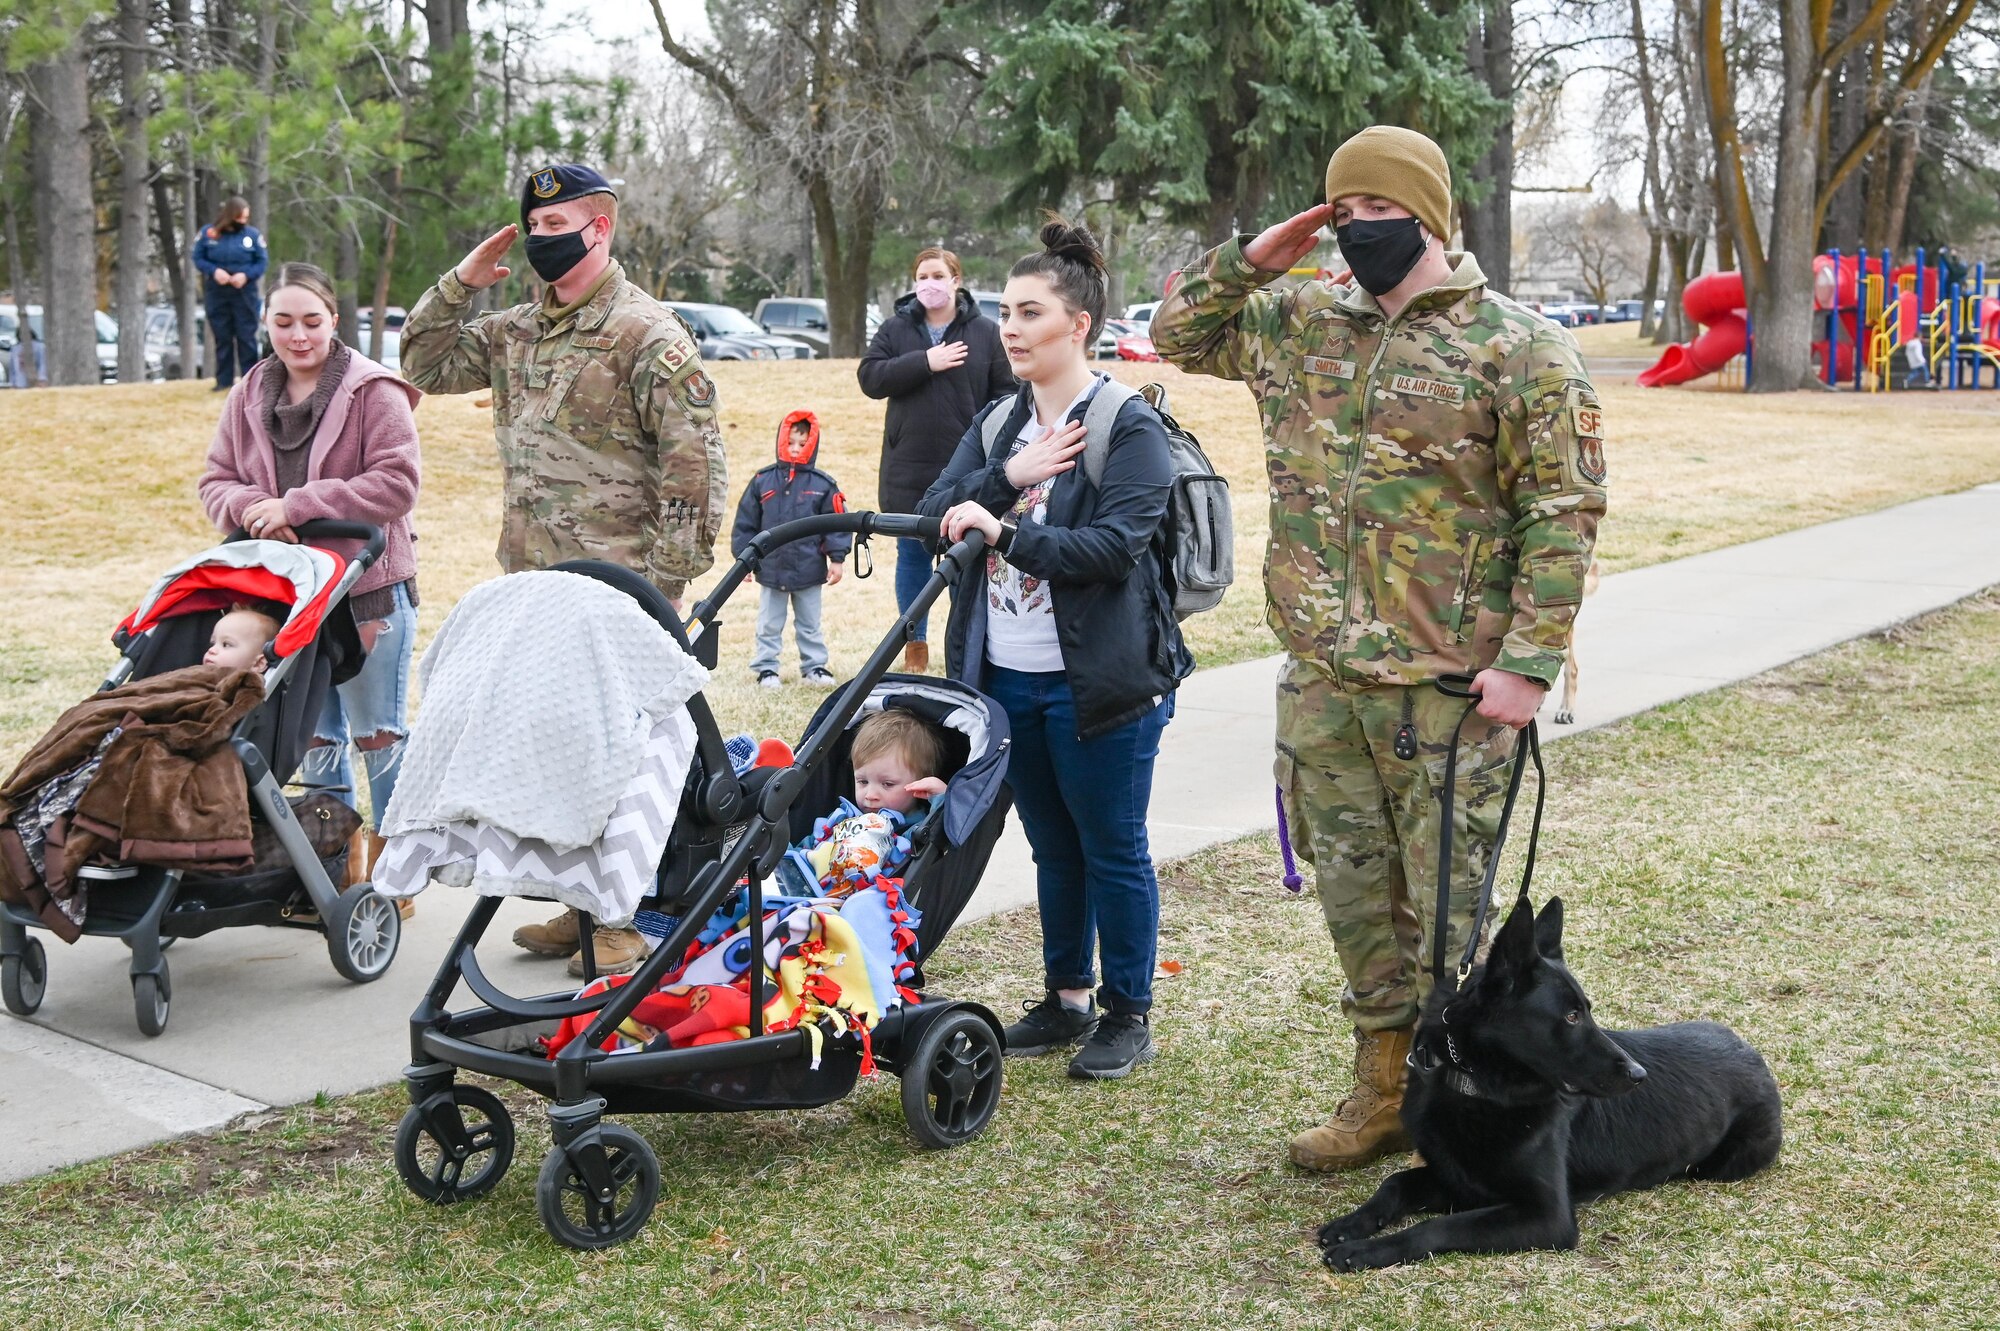 Handlers and their Military Working Dogs from 75th Security Forces Squadron at Hill Air Force Base, Utah, attend the Vietnam Veterans War Dog Memorial dedication ceremony Mar. 13, 2021, in Layton, Utah. The memorial features a monument honoring war dogs that served during a time when they were forgotten. (U.S. Air Force photo by Cynthia Griggs)